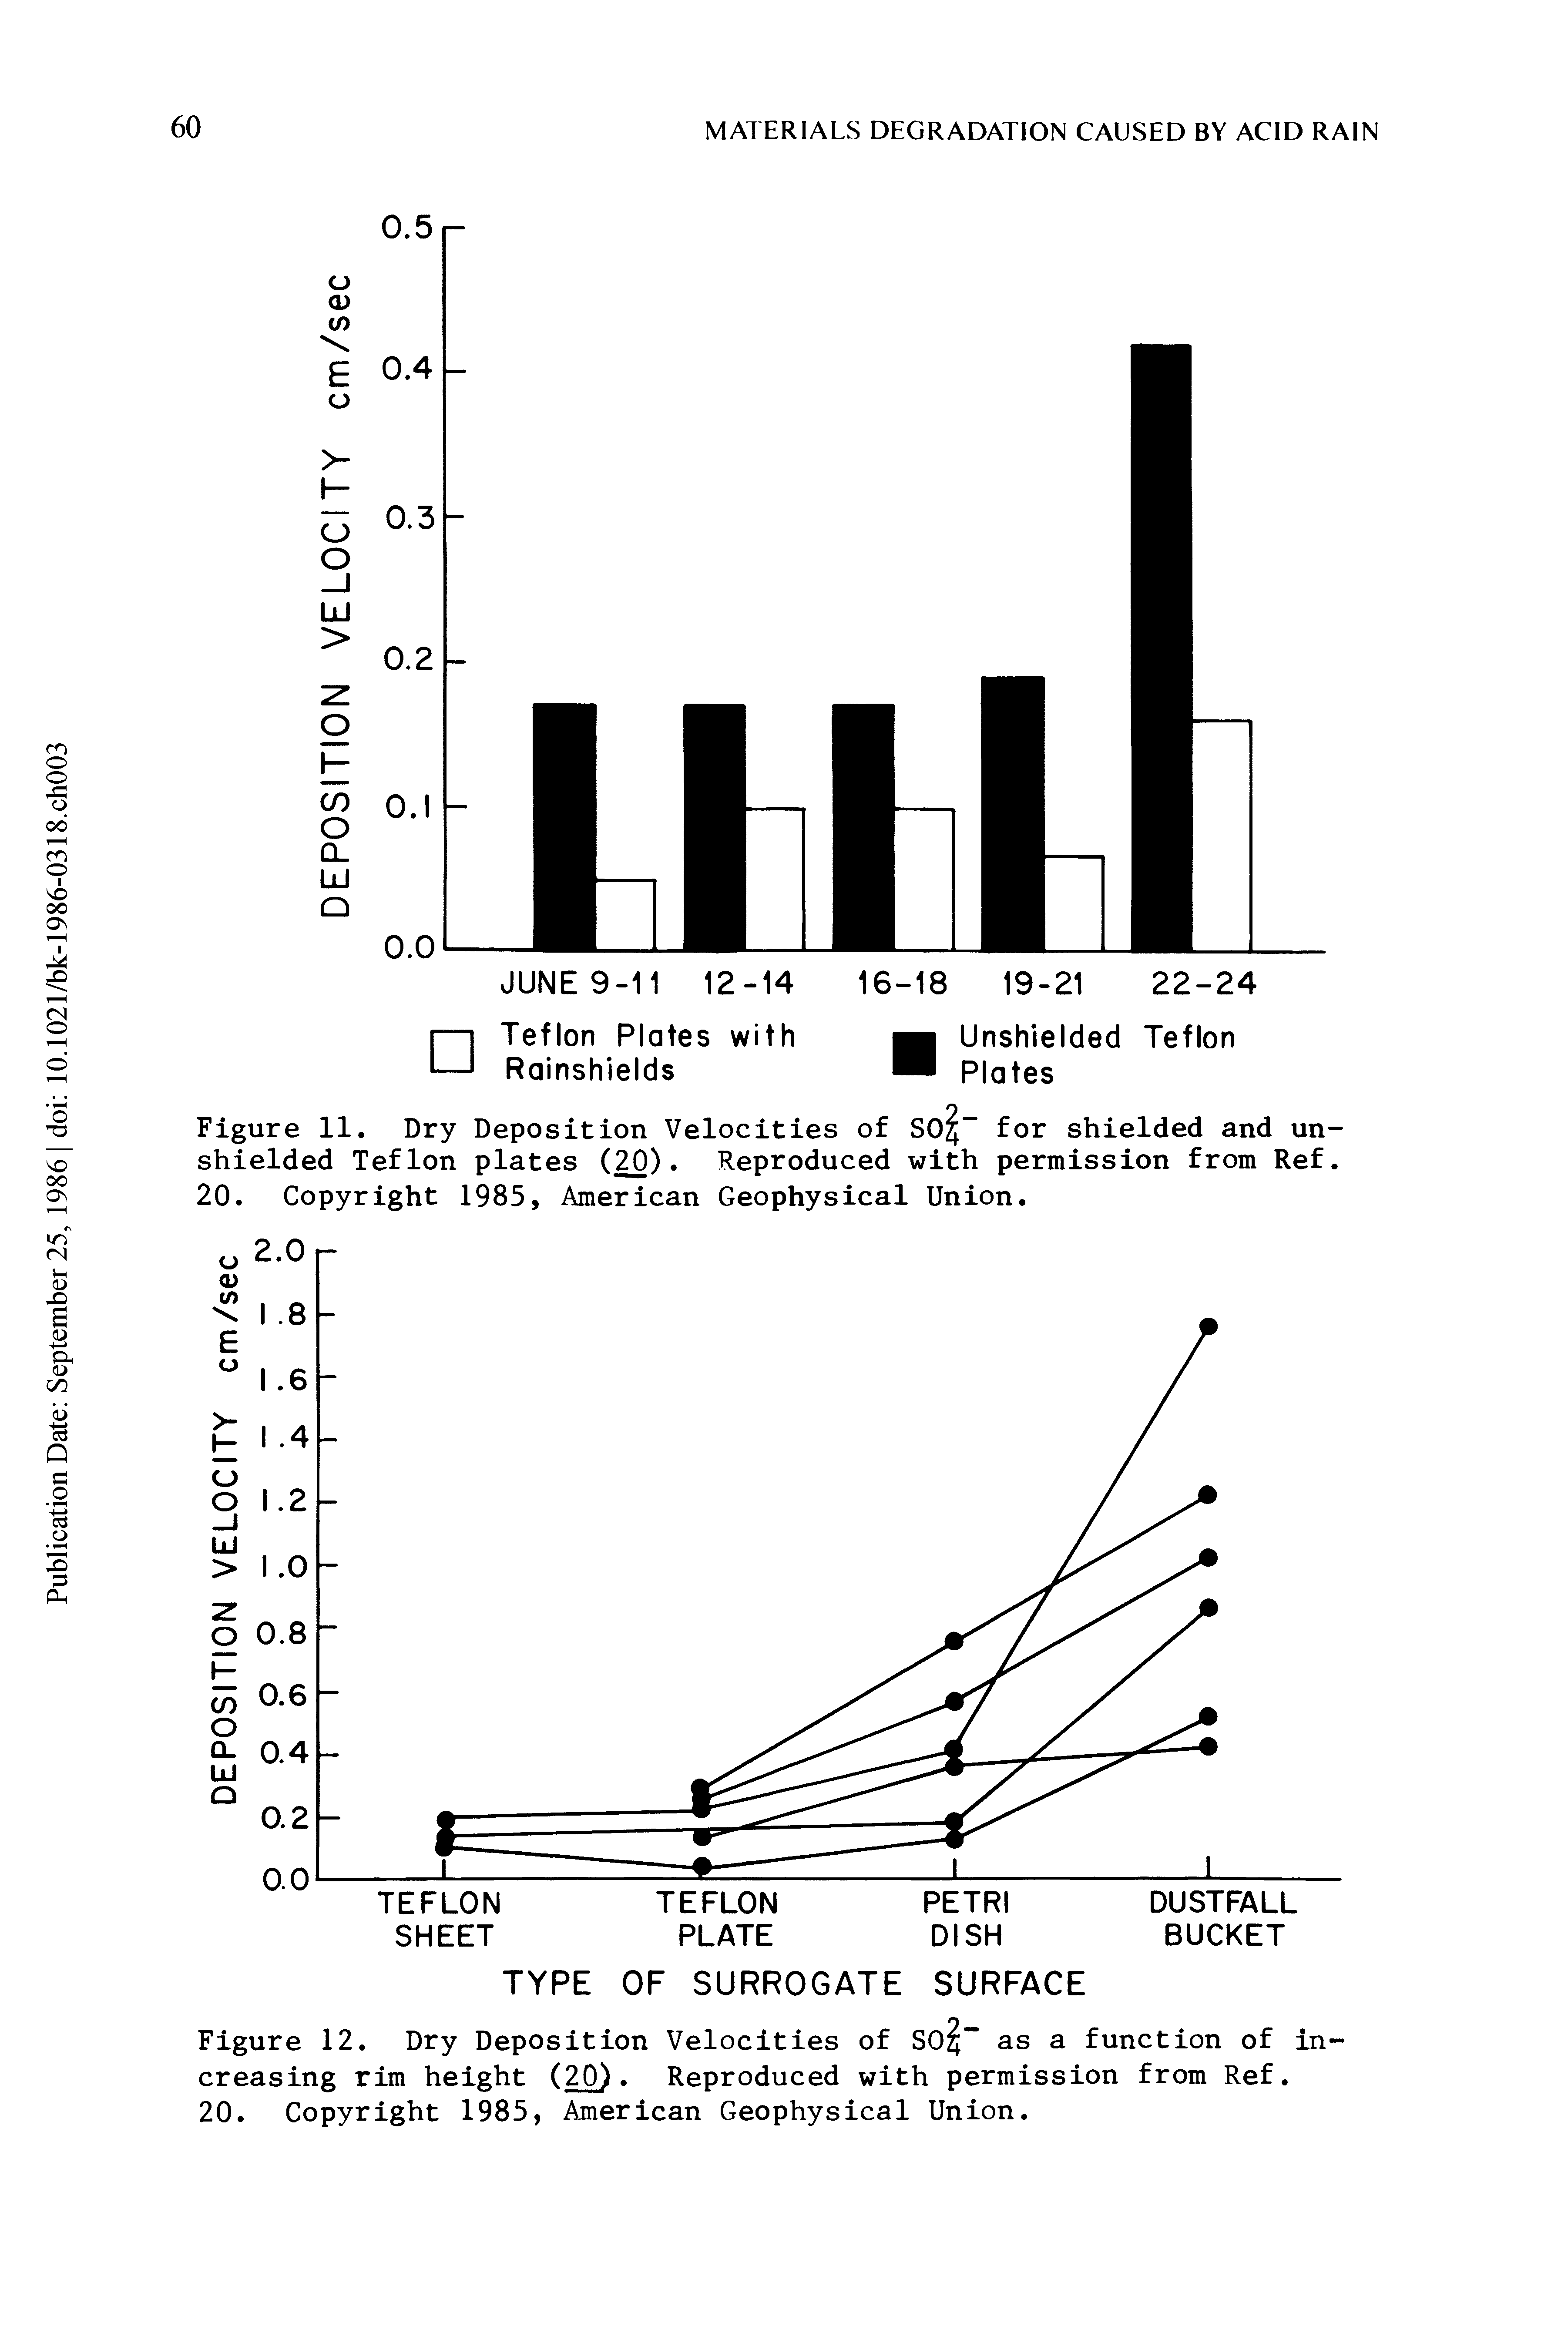 Figure 11. Dry Deposition Velocities of SO for shielded and unshielded Teflon plates (20) Reproduced with permission from Ref. 20. Copyright 1985, American Geophysical Union.